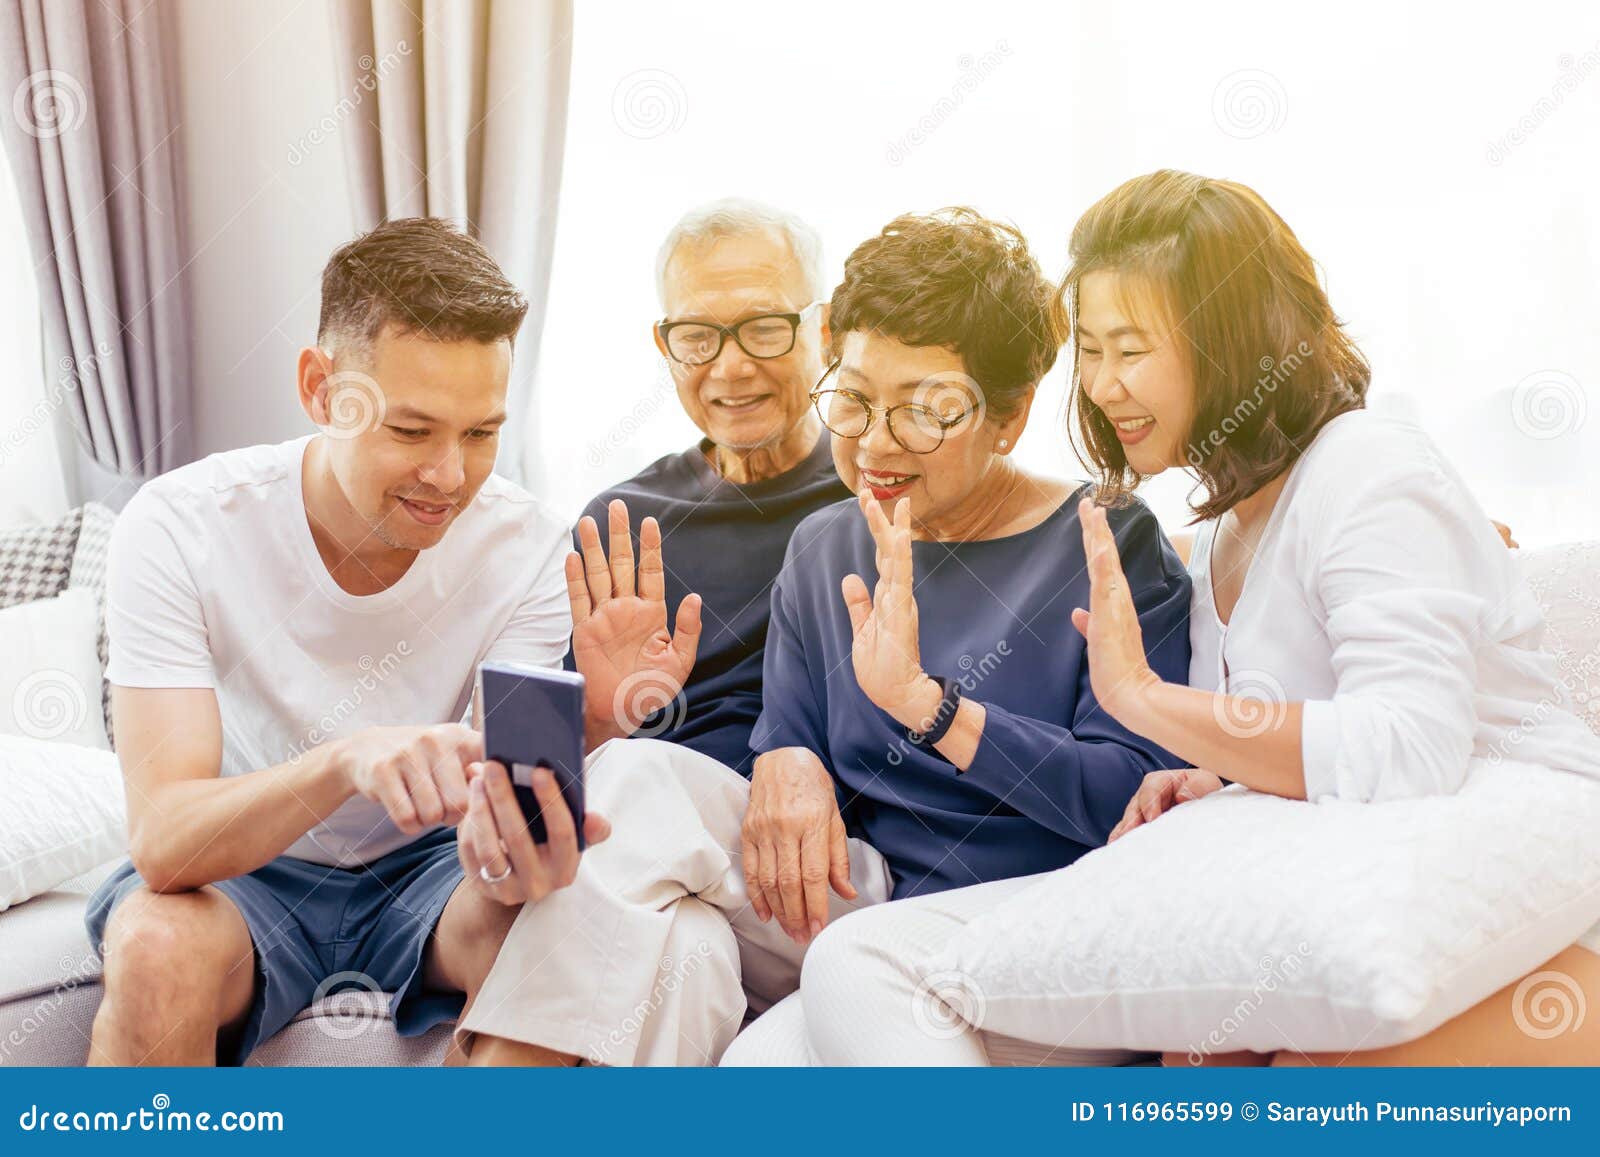 asian family with adult children and senior parents making a video call and waving at the caller at home.